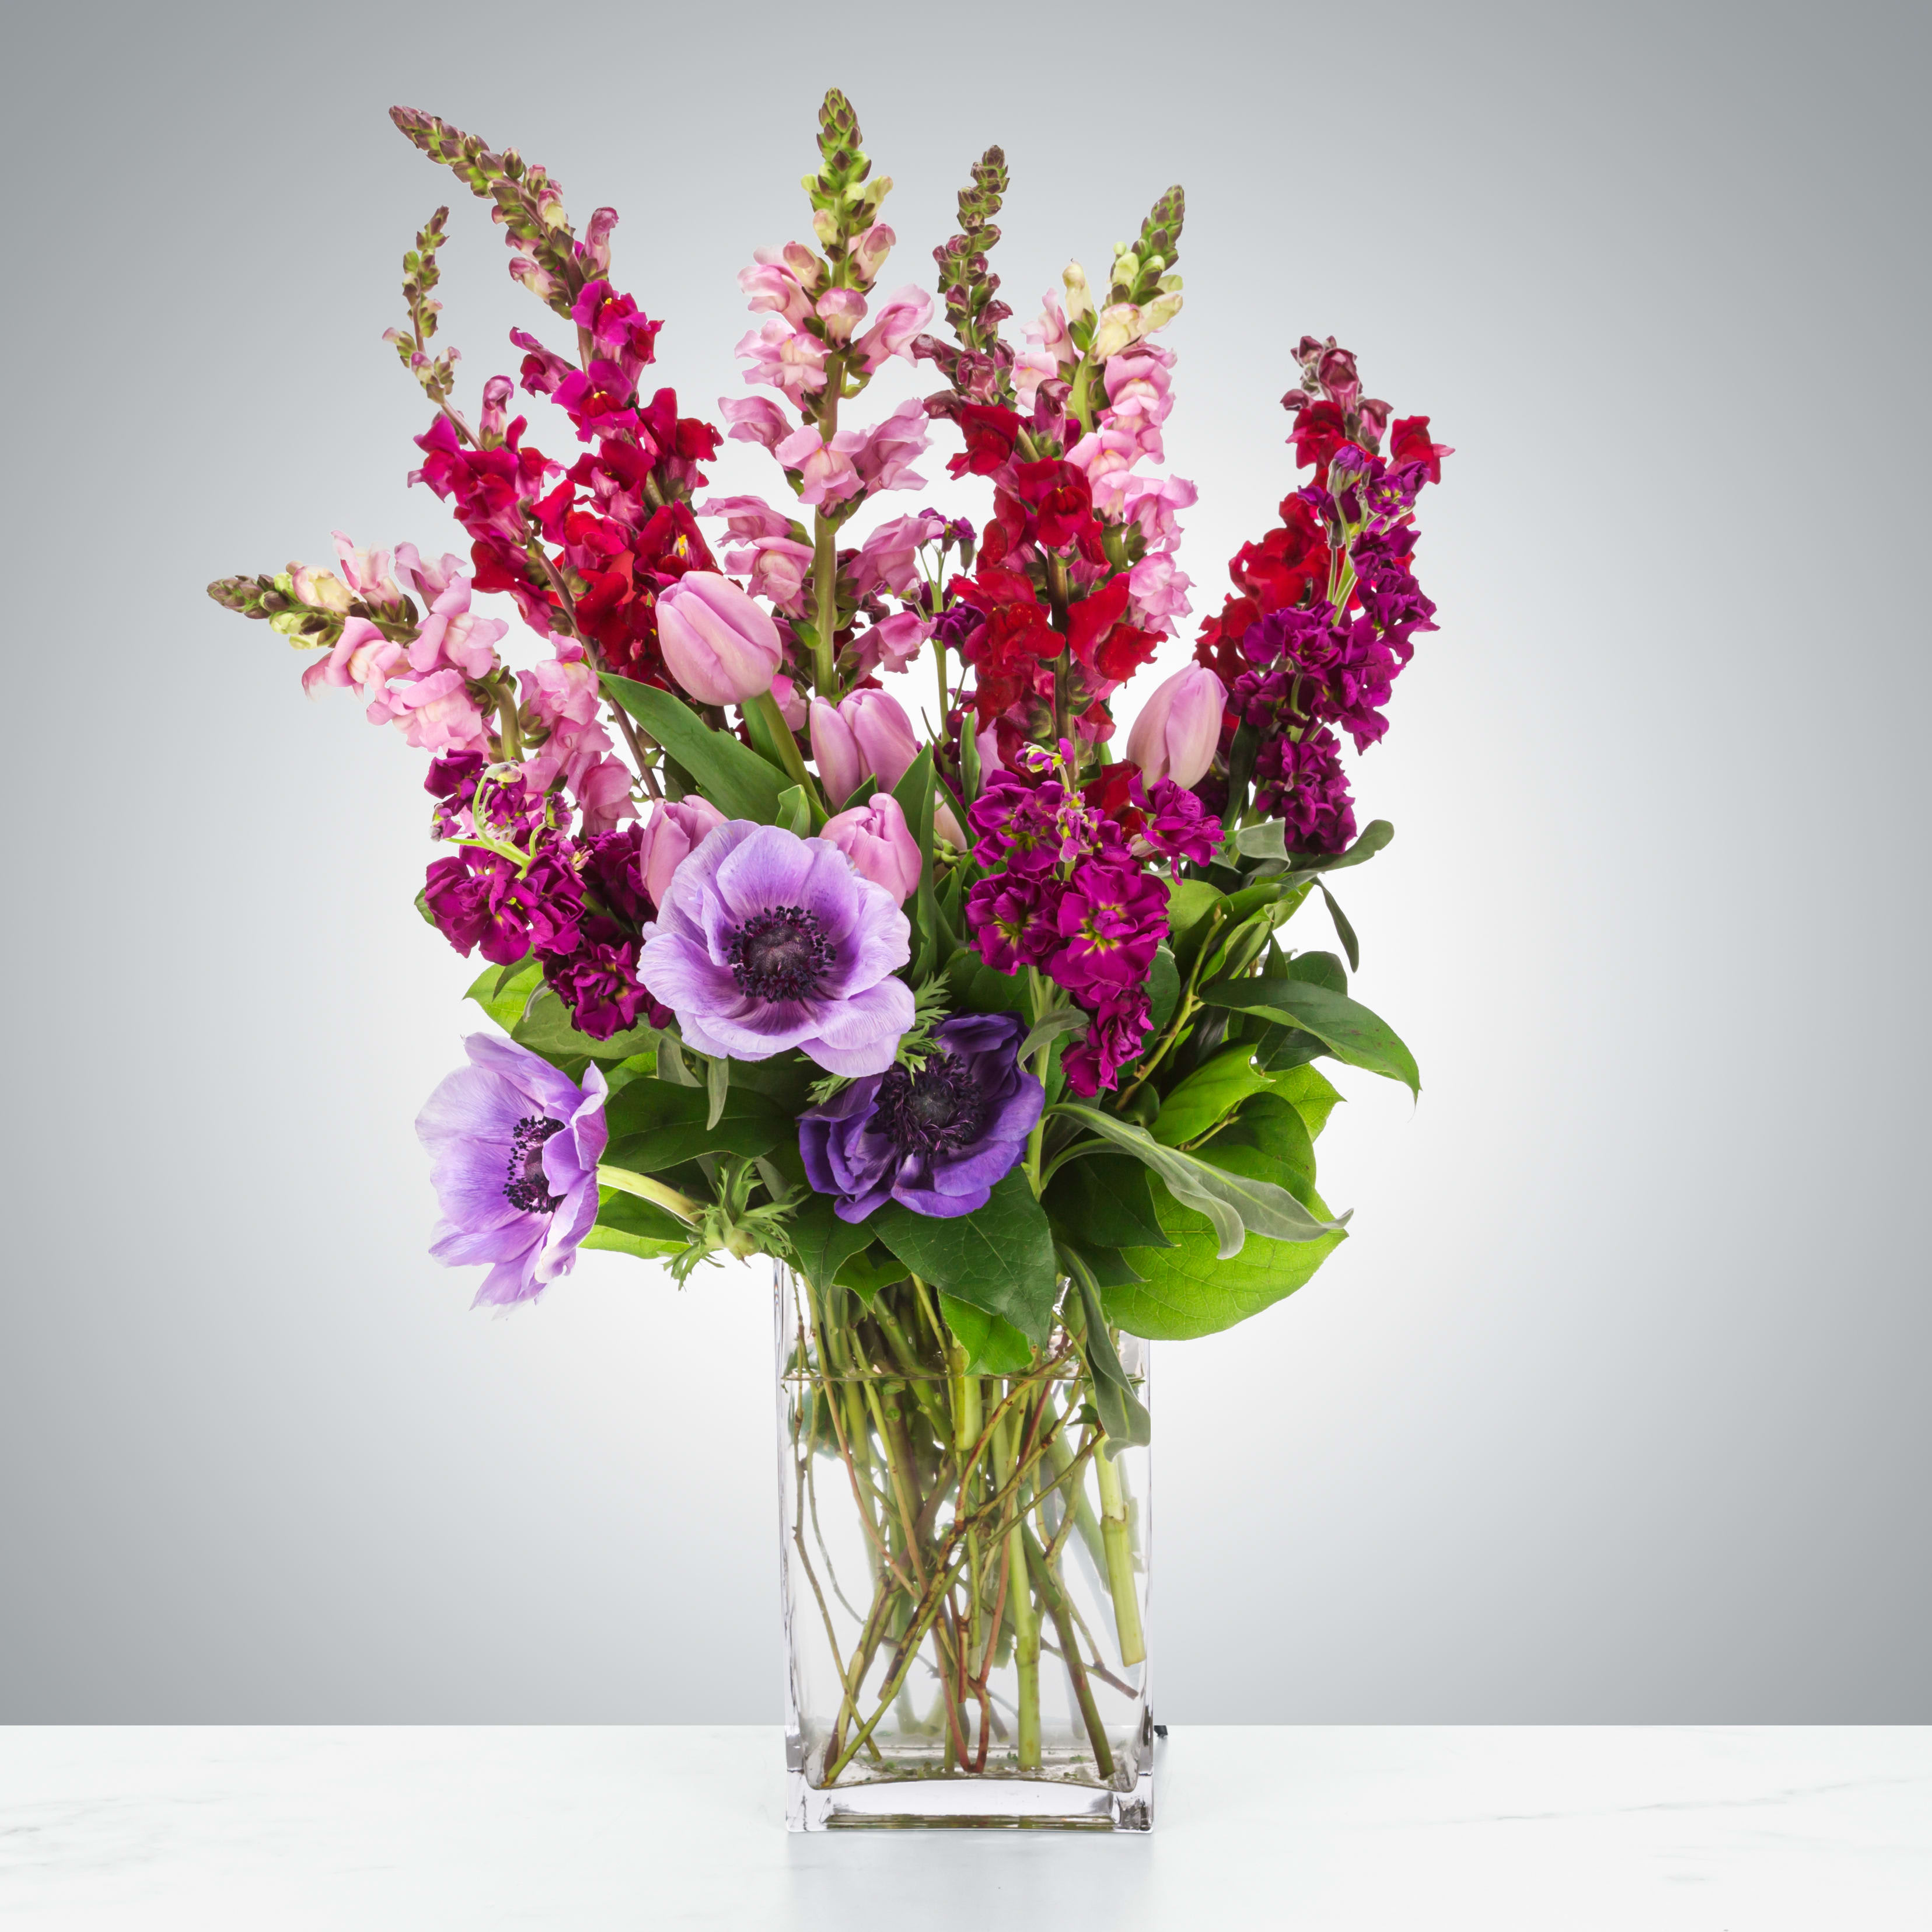 Holiday Magic - Holiday Magic can come in a variety of beautiful purple colors just like this arrangement. Featuring Anemones, tulips, and snapdragons, this arrangement makes a beautiful birthday present or a lovely congratulations gift.   